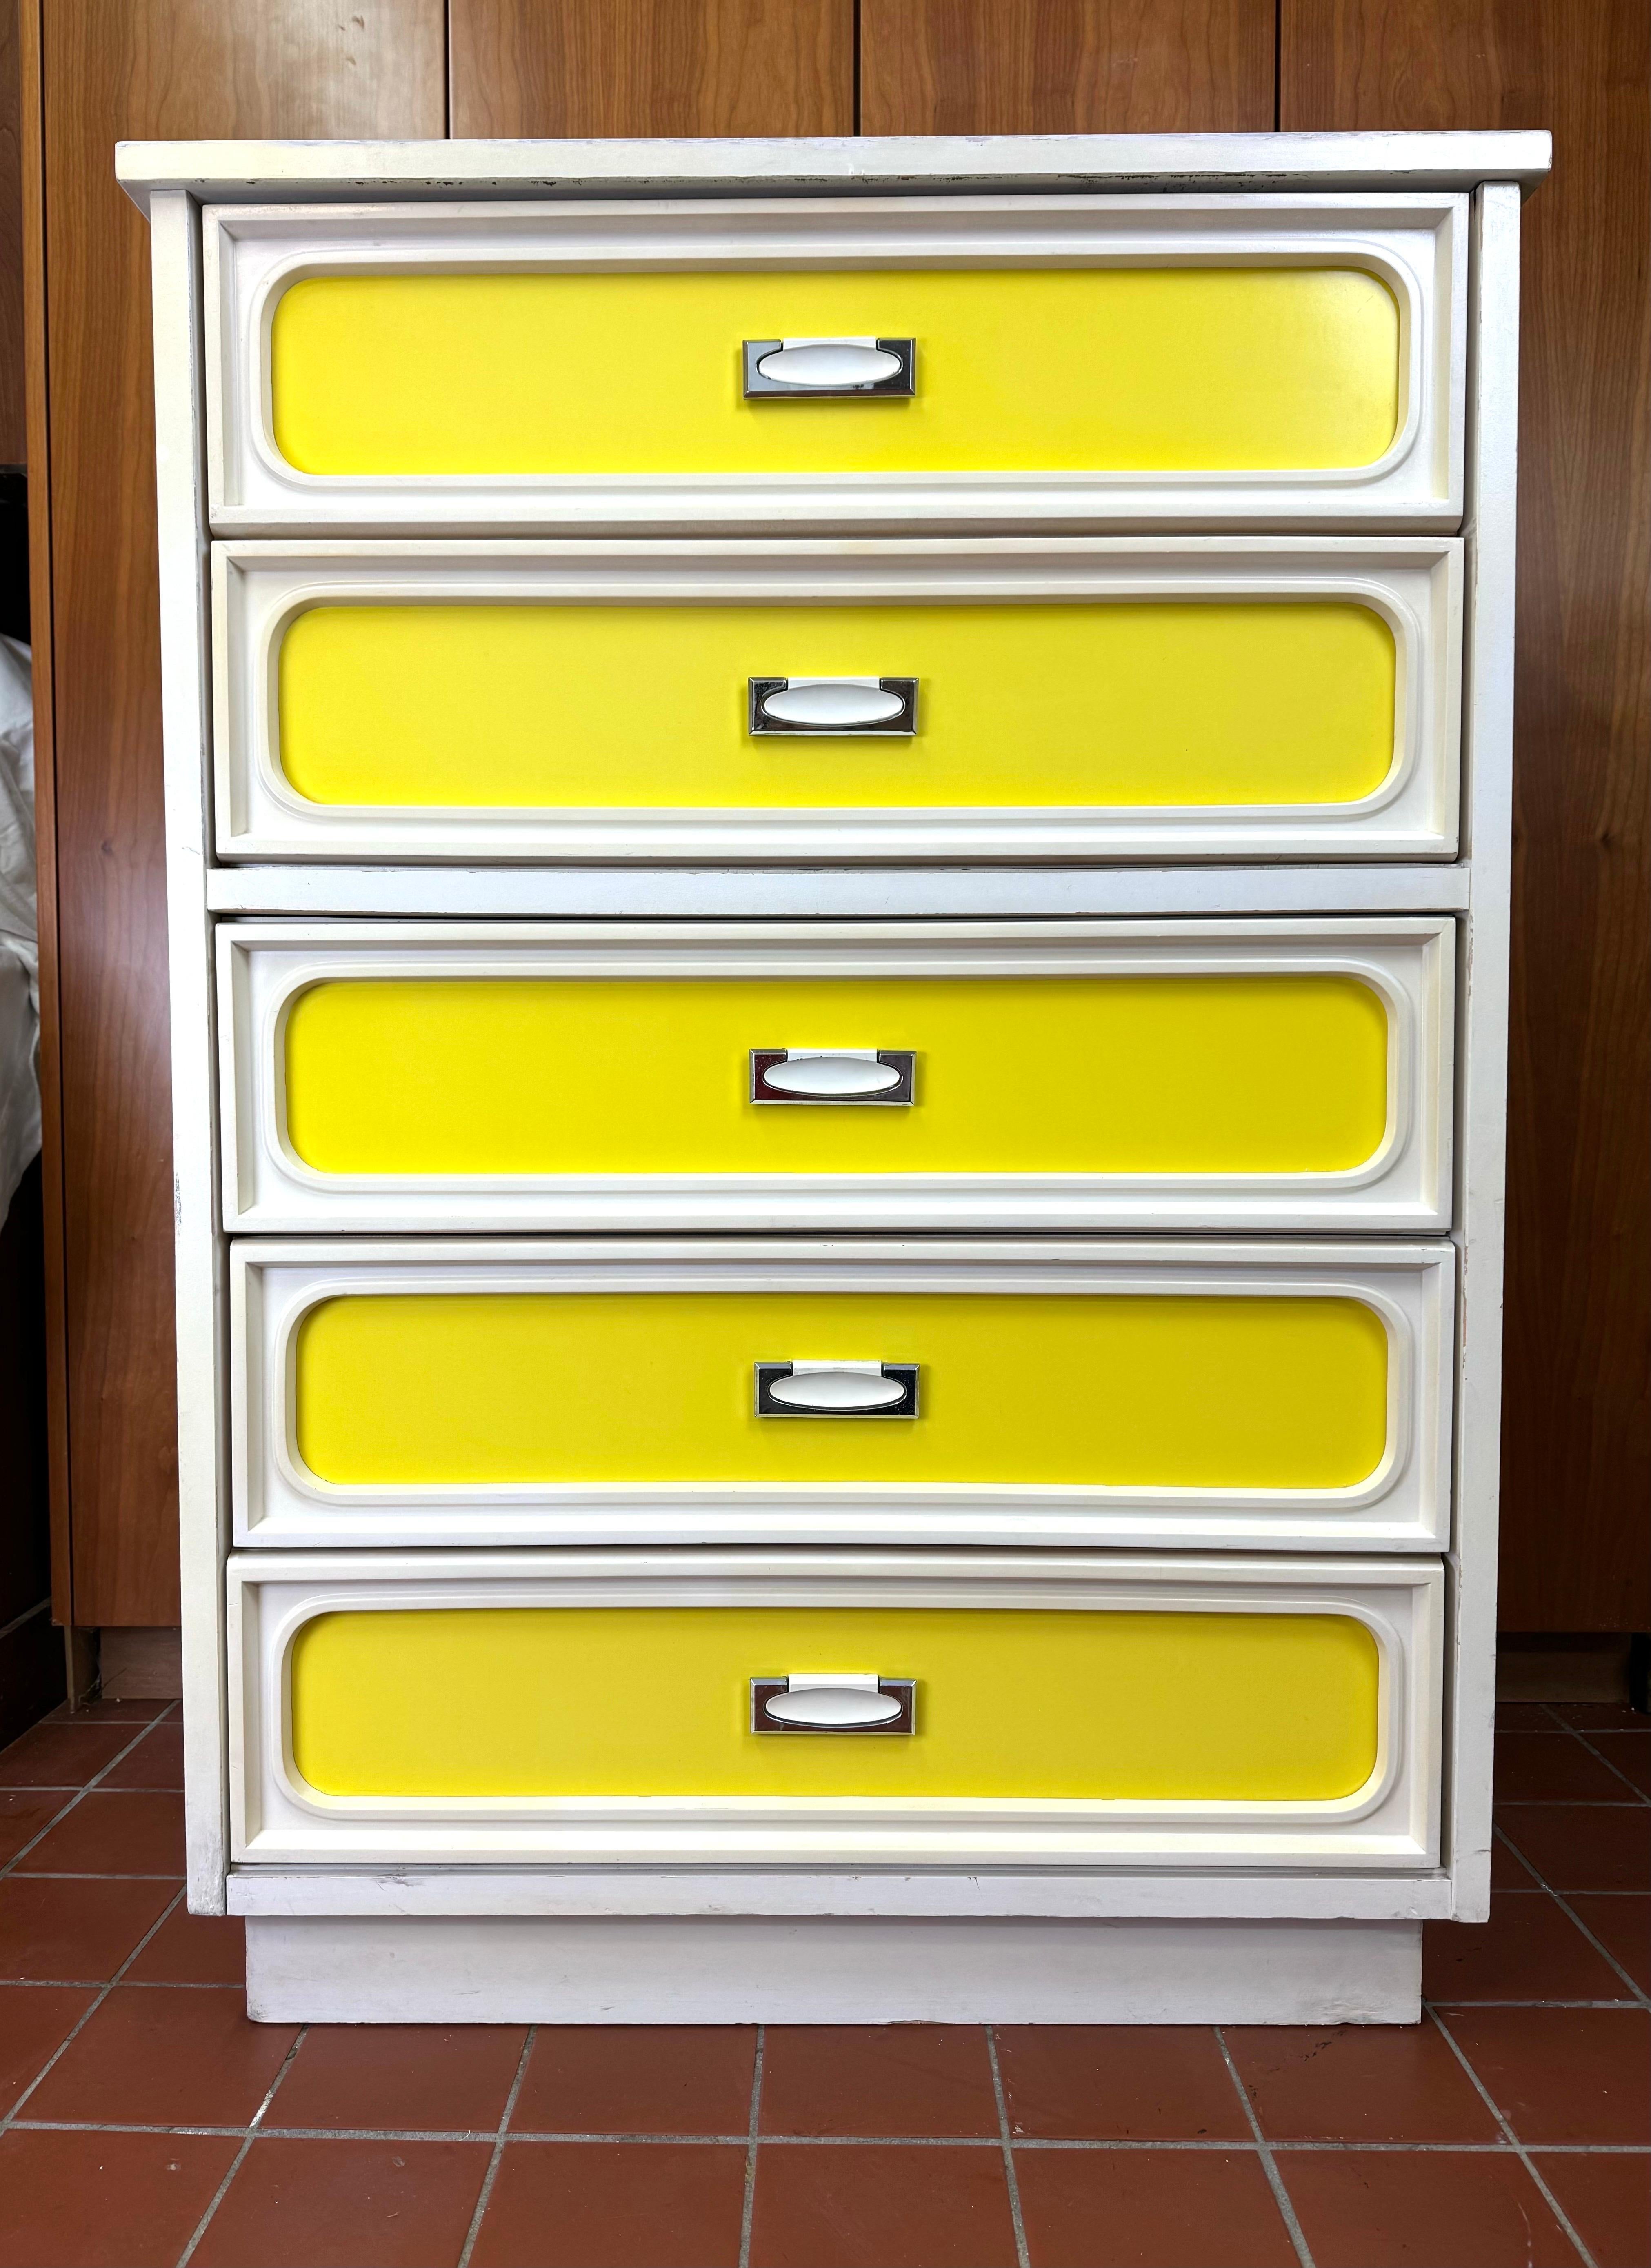 Space Age Five Drawer Dresser in Yellow and White. Or Green and White. The colored panels are interchangeable. Choose Lime green or lemon yellow. How creative. More photos to be added. Perfect for that Atomic vibe design. Very rare and sought after. 